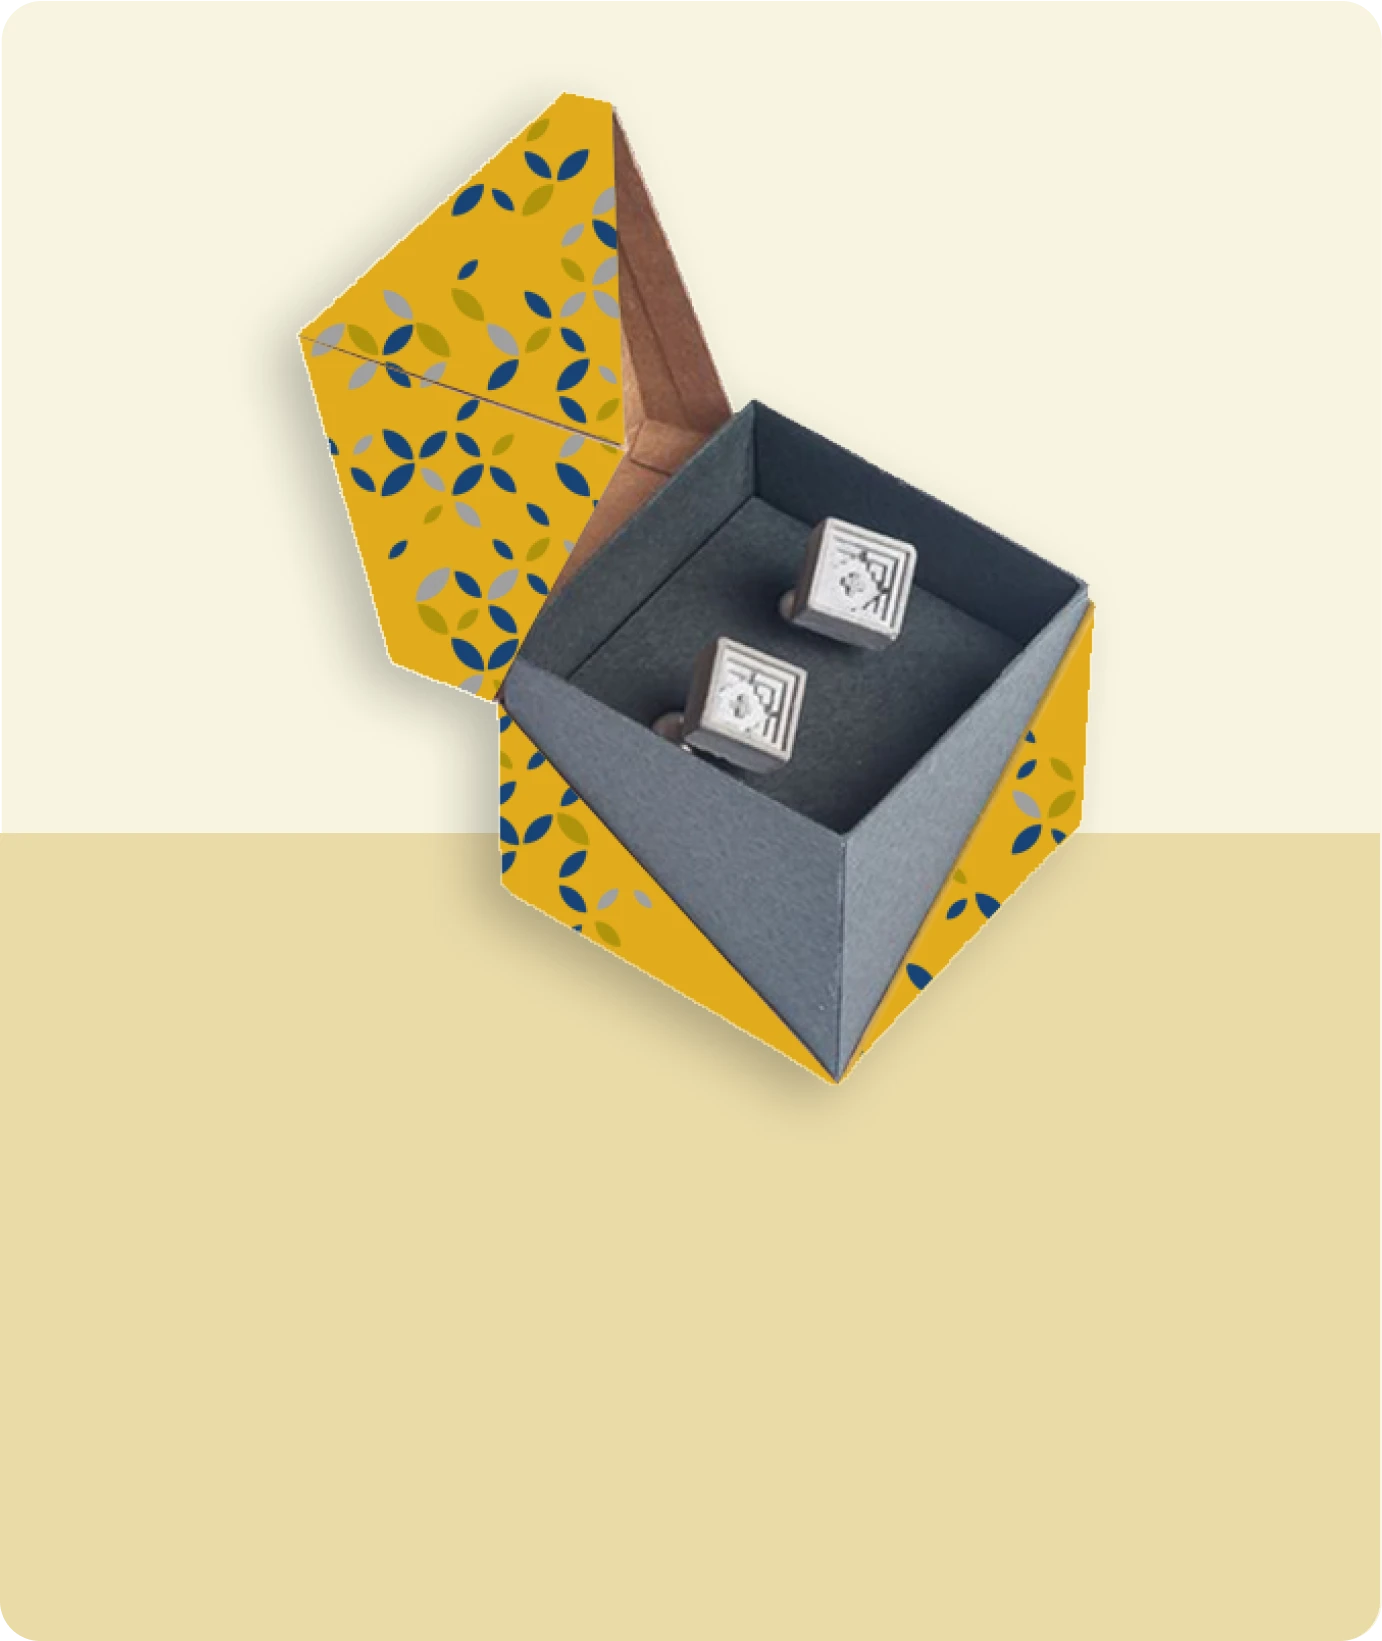 Custom Cufflink Boxes related products image | The Box Lane